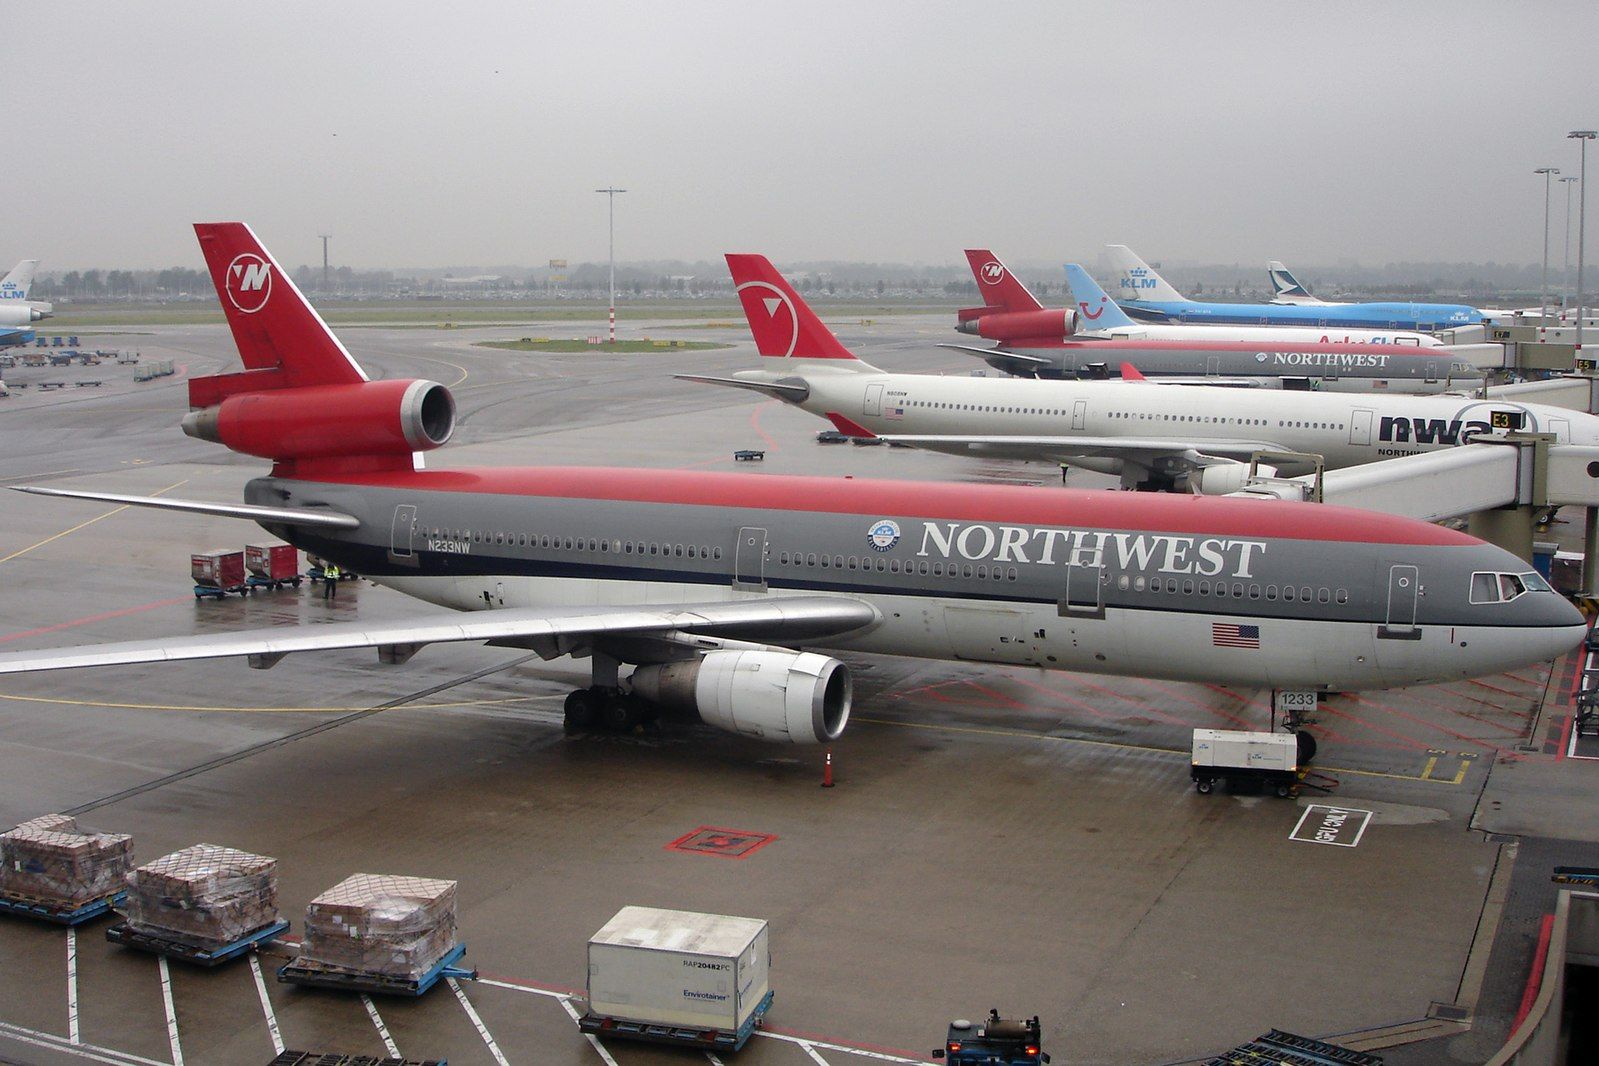 Several Northwest Airlines aircraft parekd on an airport apron.